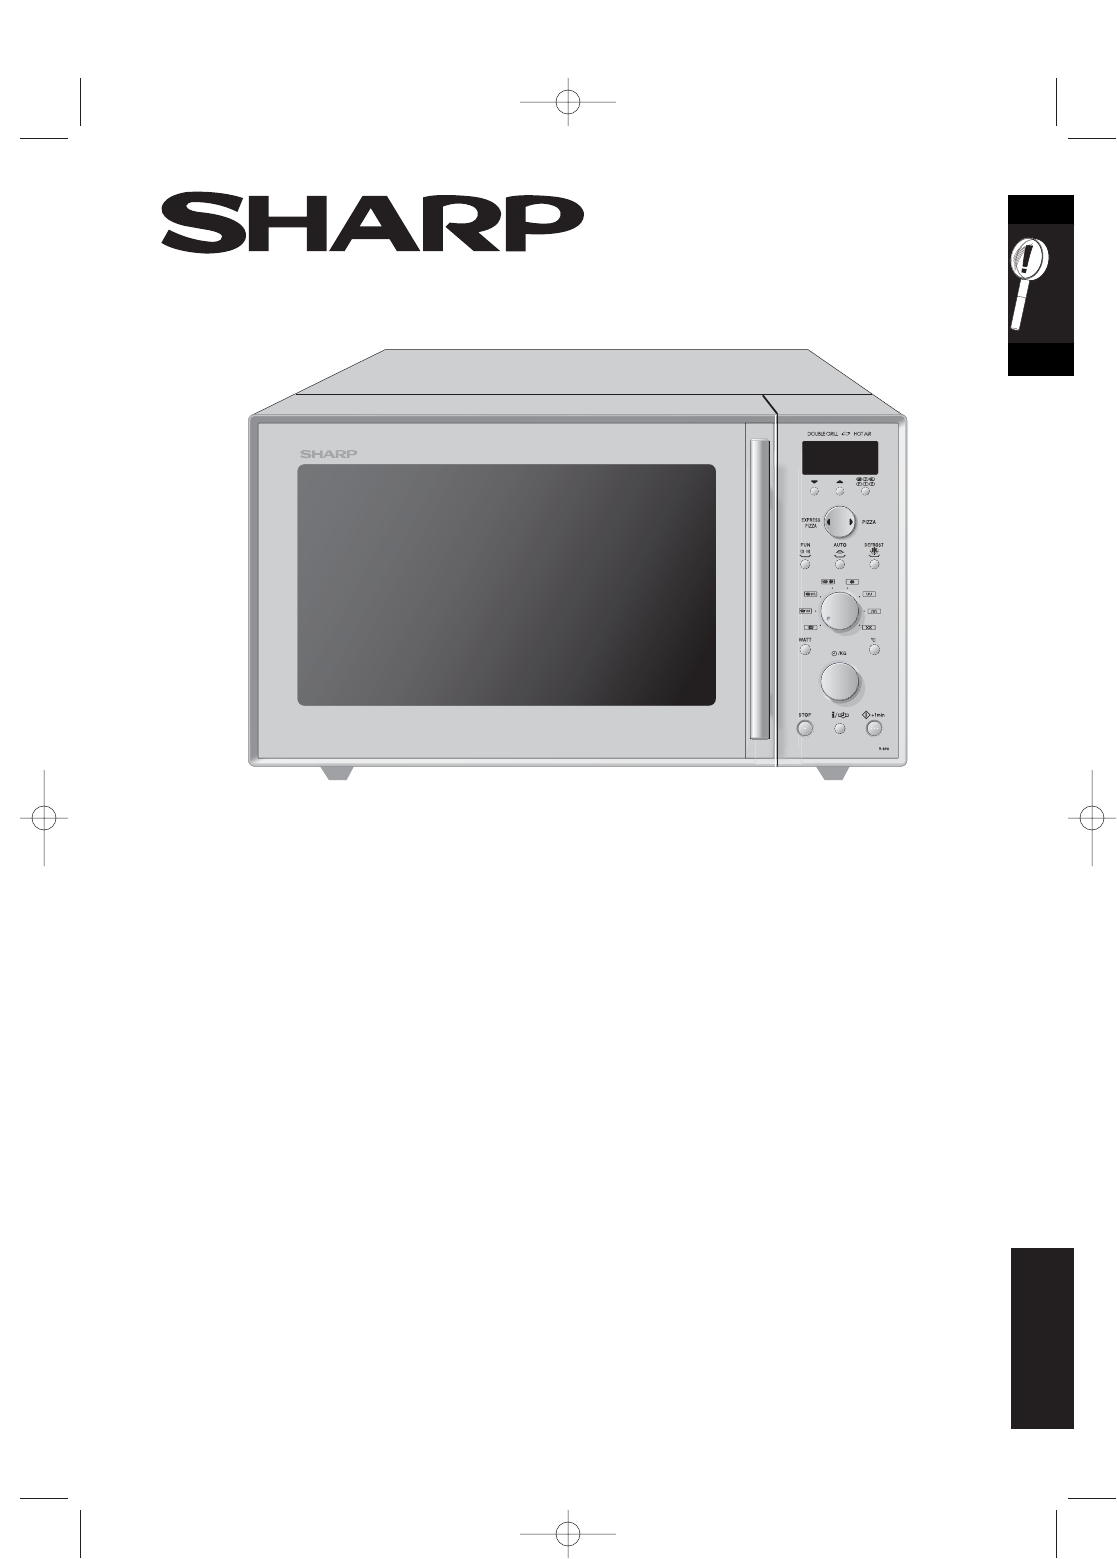 Sharp Microwave Ovens Manuals